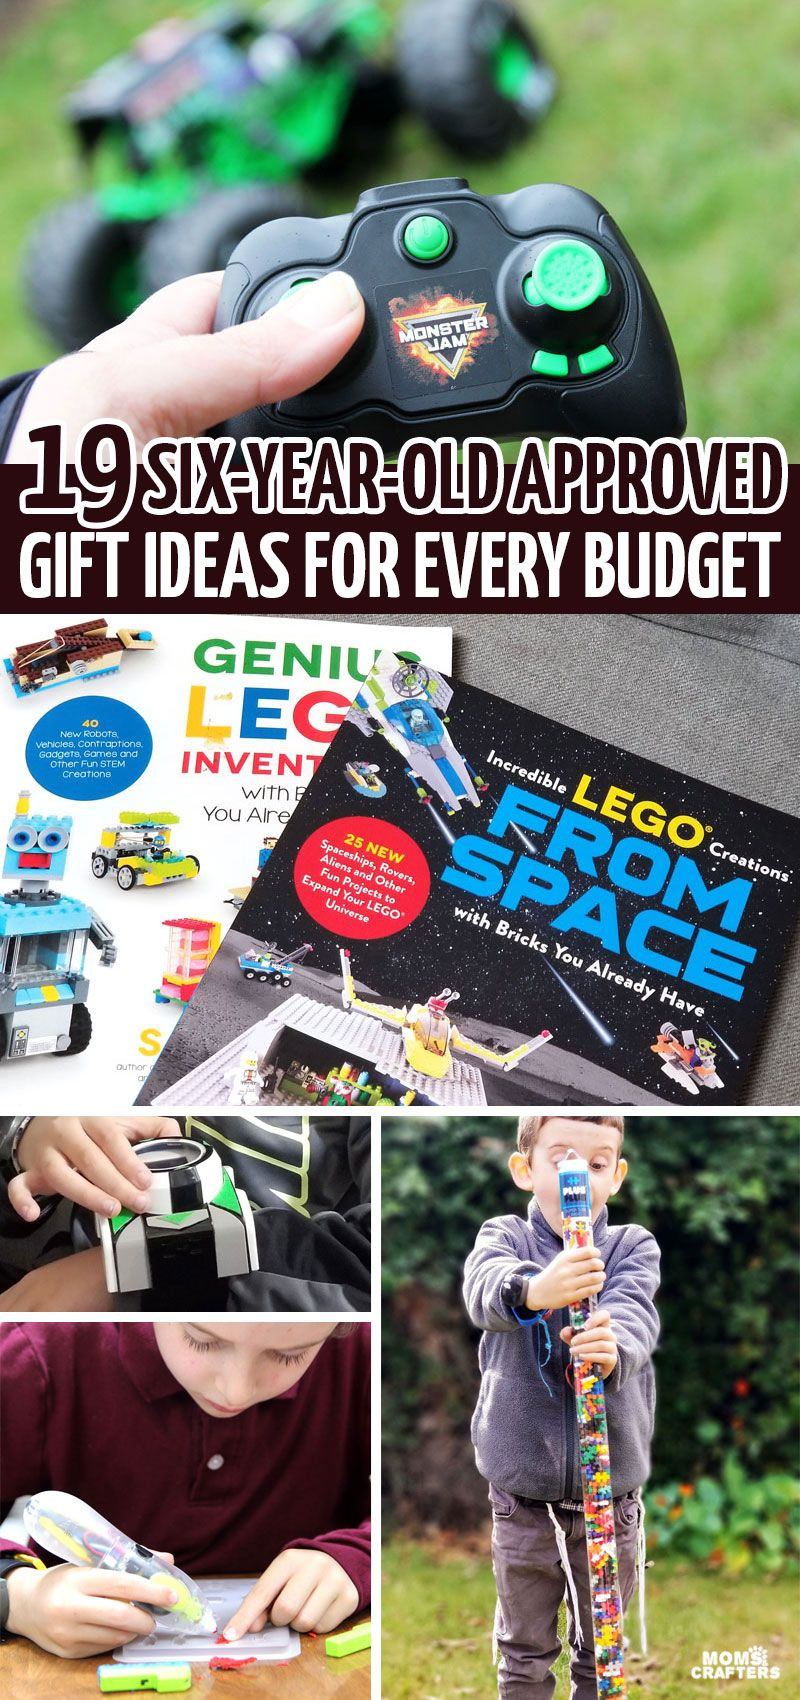 Boys Gift Ideas Age 6
 The Best Birthday Gifts for a 6 Year Old Boy